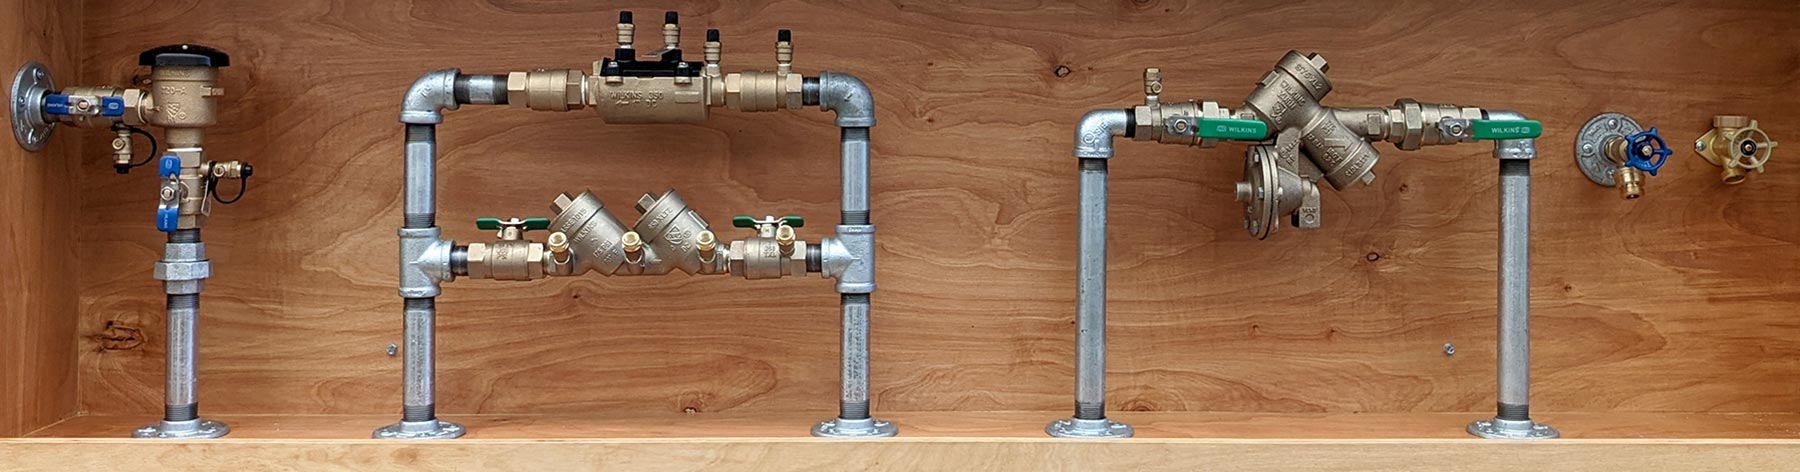 Is backflow testing necessary?